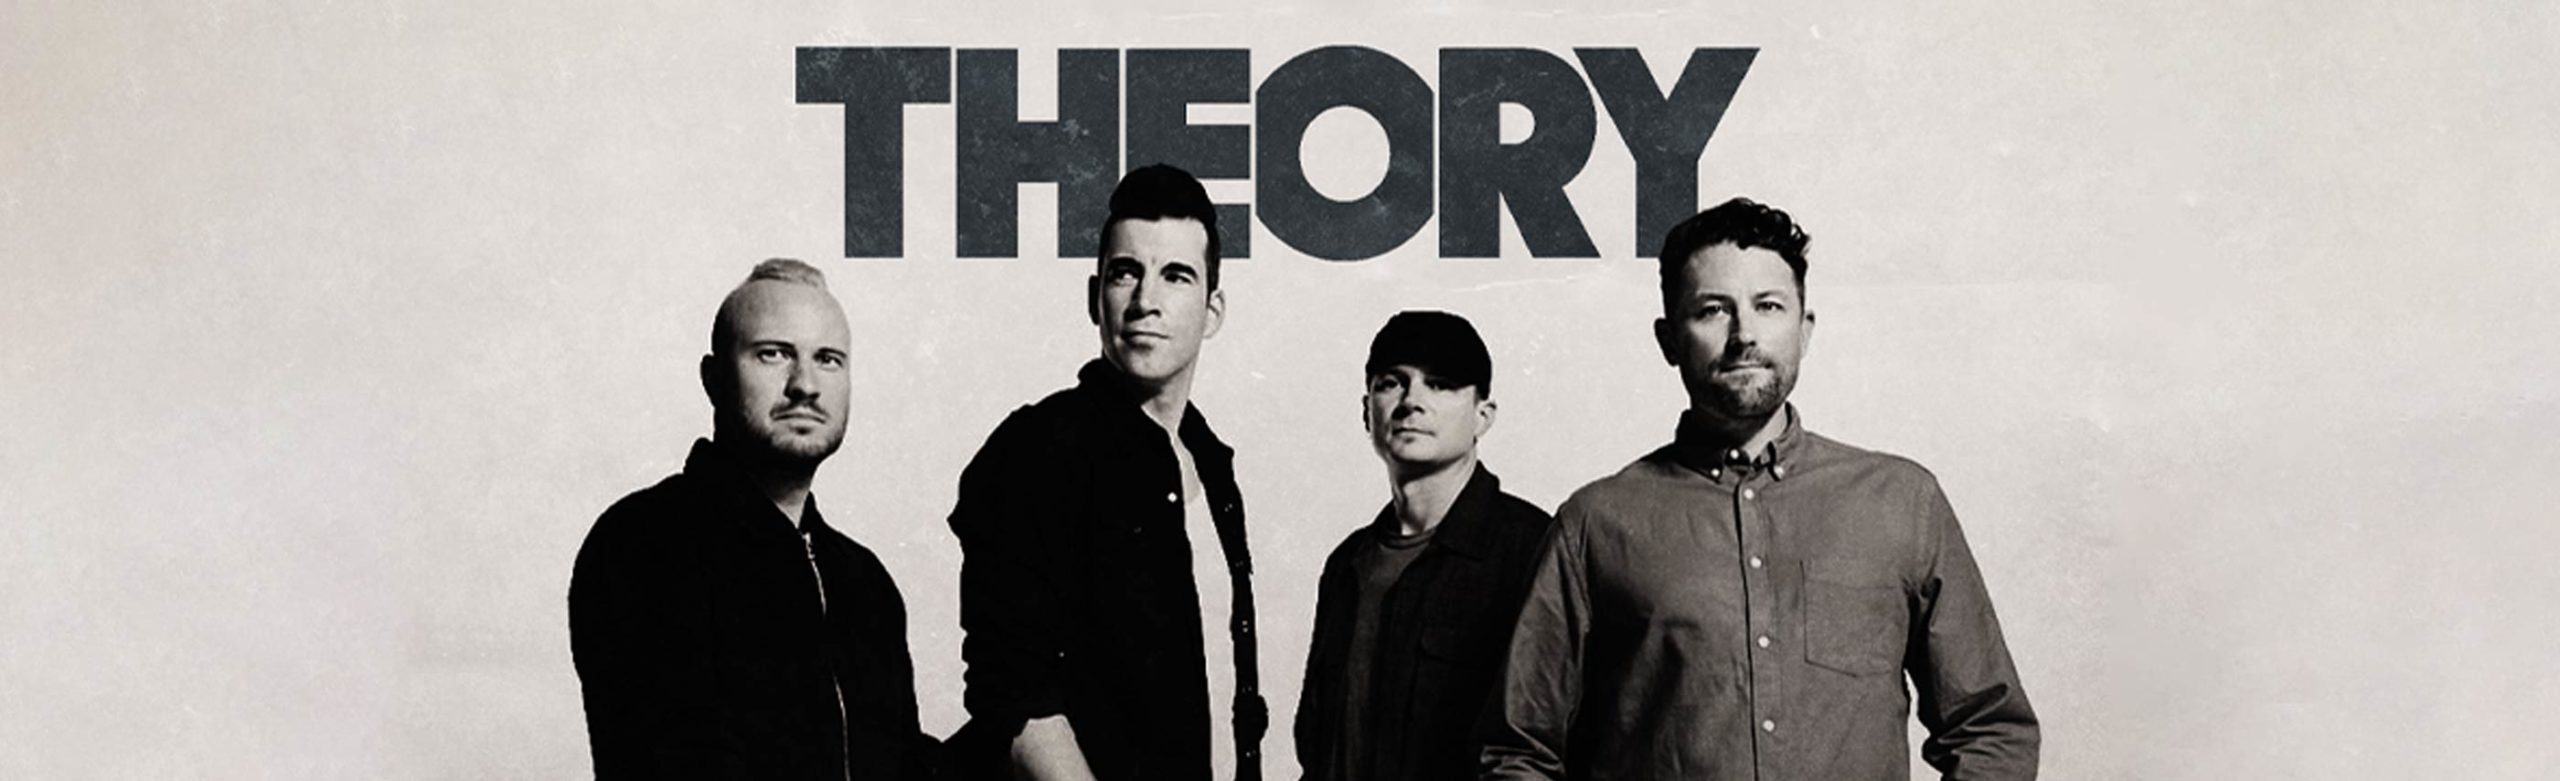 Theory of a Deadman Tickets Giveaway 2022 Image